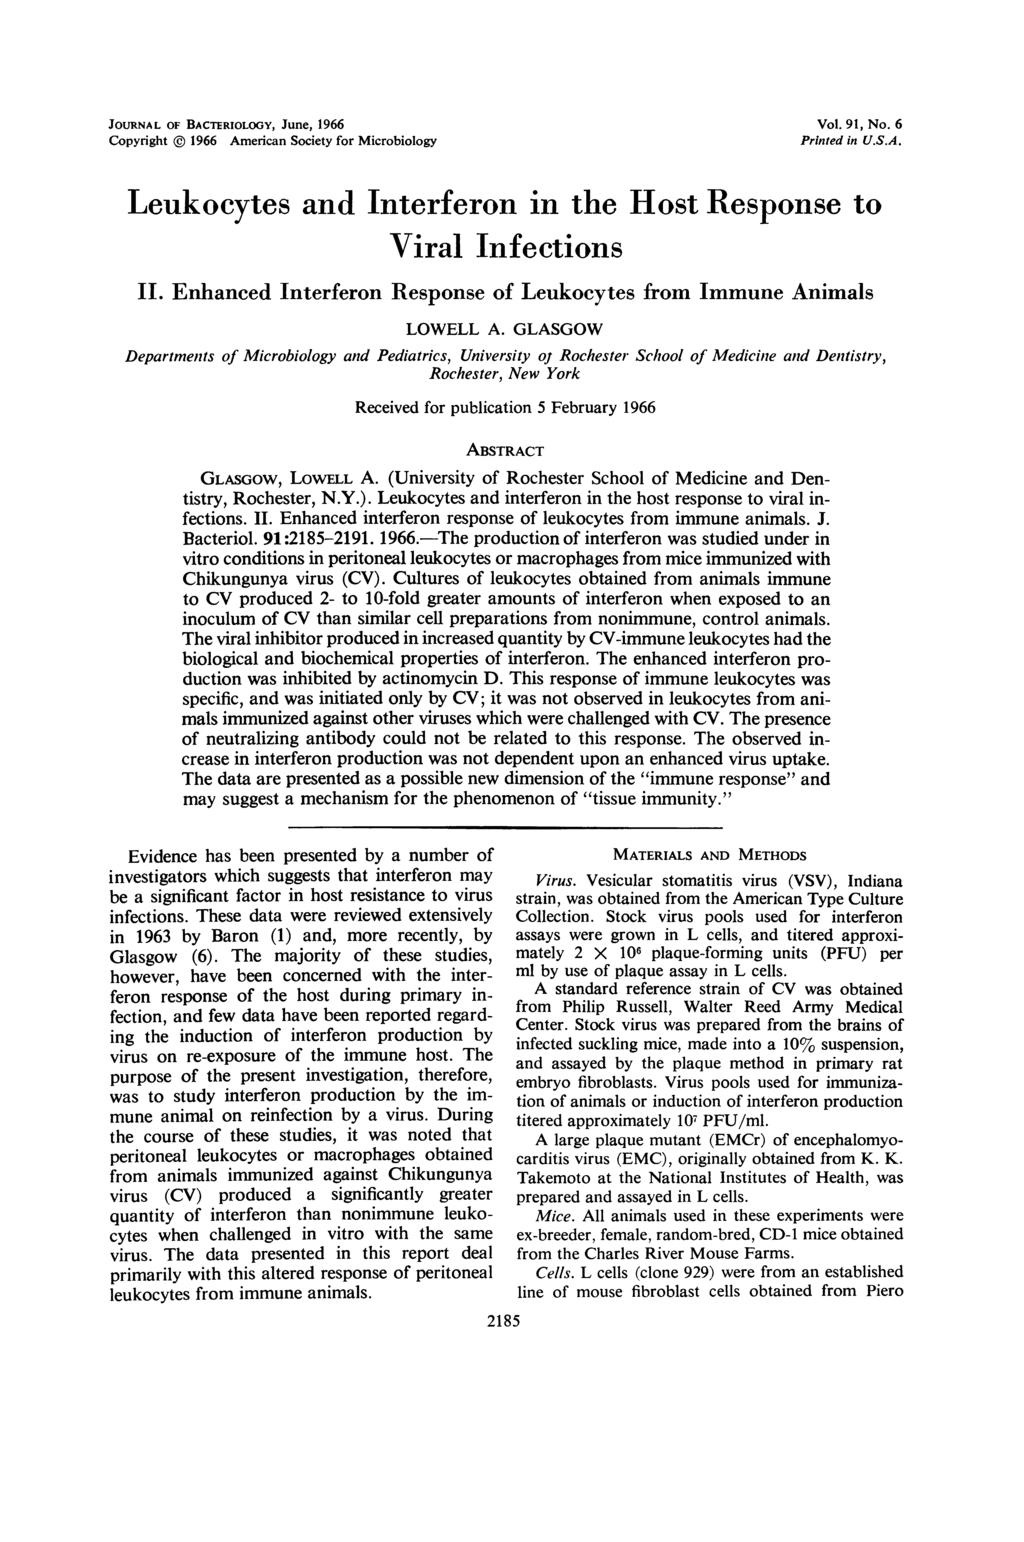 JOURNAL OF BACTERIOLOGY, June, 1966 Copyright 1966 American Society for Microbiology Vol. 91, No. 6 Printed in U.S.A. Leukocytes and Interferon in the Host Response to Viral Infections IL.